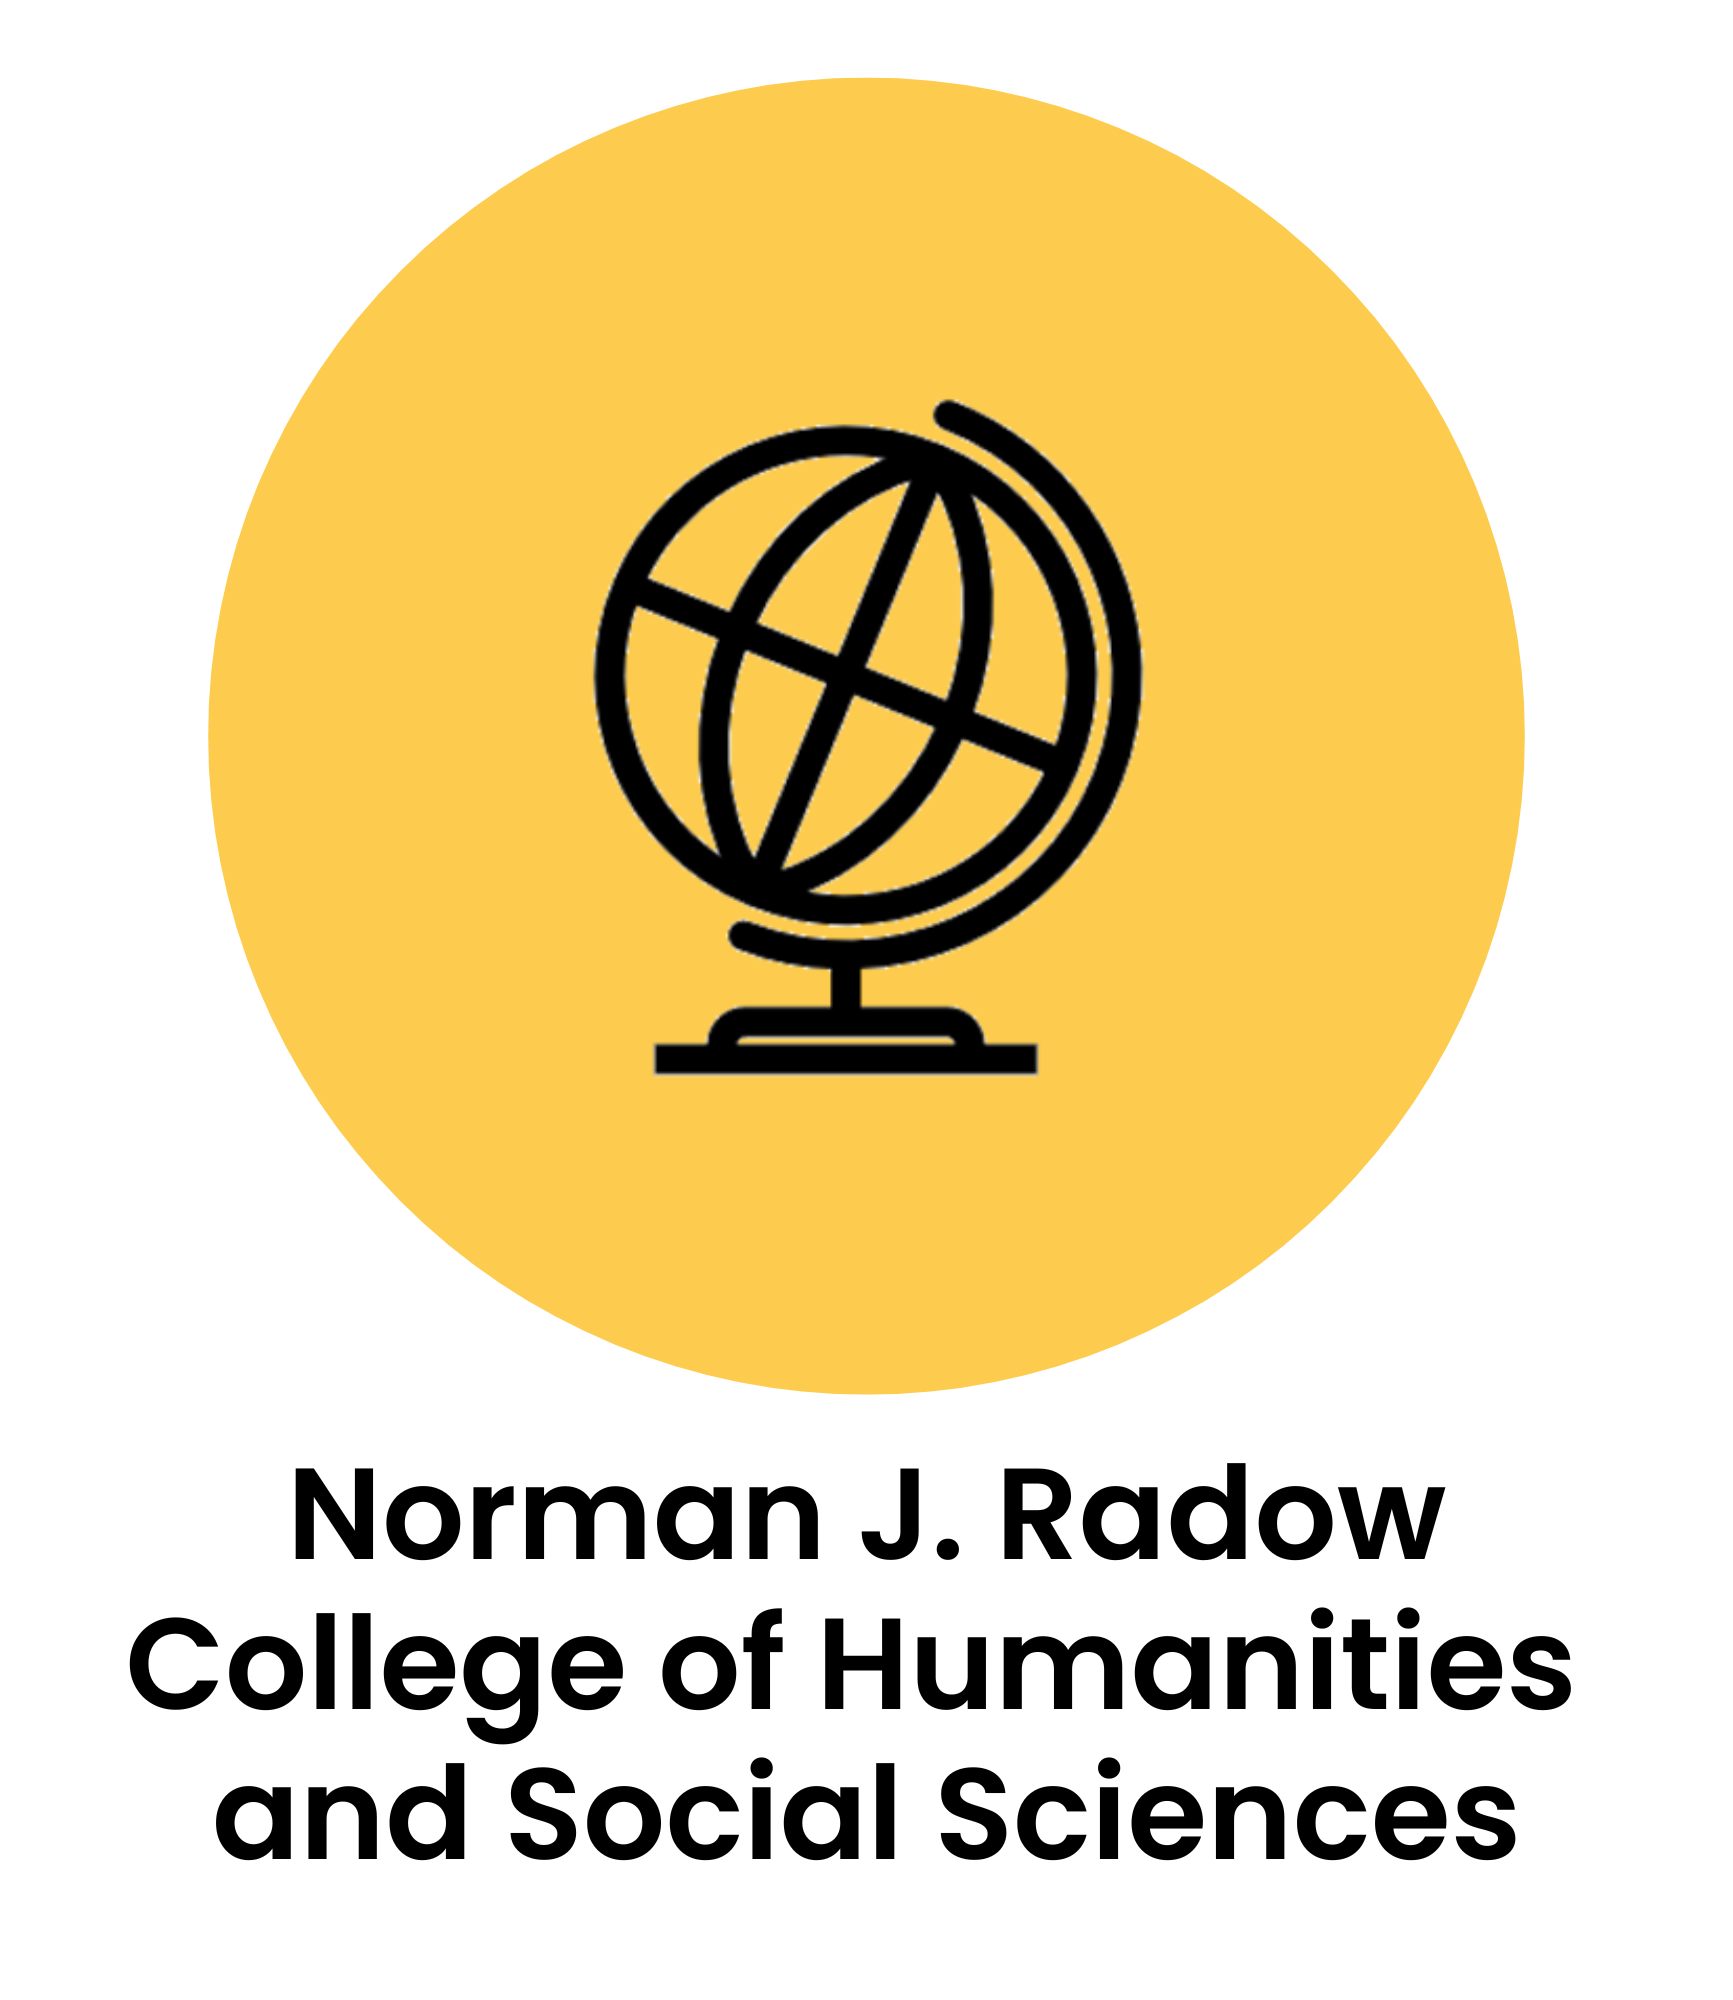 [text] Norman J. Radow College of Humanities and Social Sciences